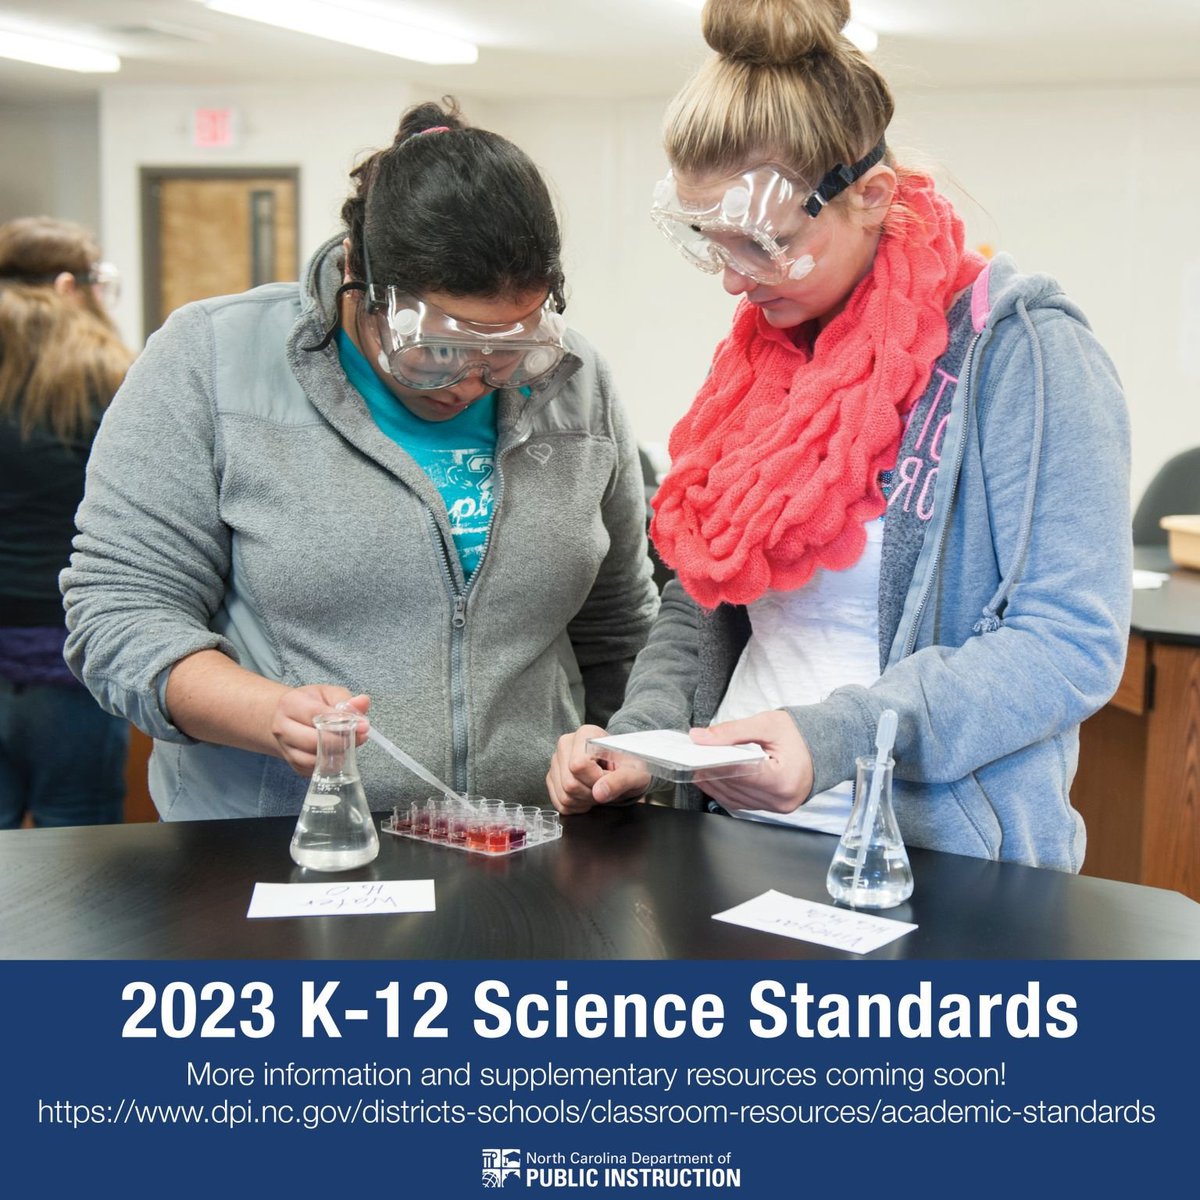 At its July meeting, the NC State Board of Education approved the 2023 K-12 Science Standards, to be implemented in the 2024-25 school year. The current 2009 K-12 Science Standards will remain in place for the 2023-24 school year.